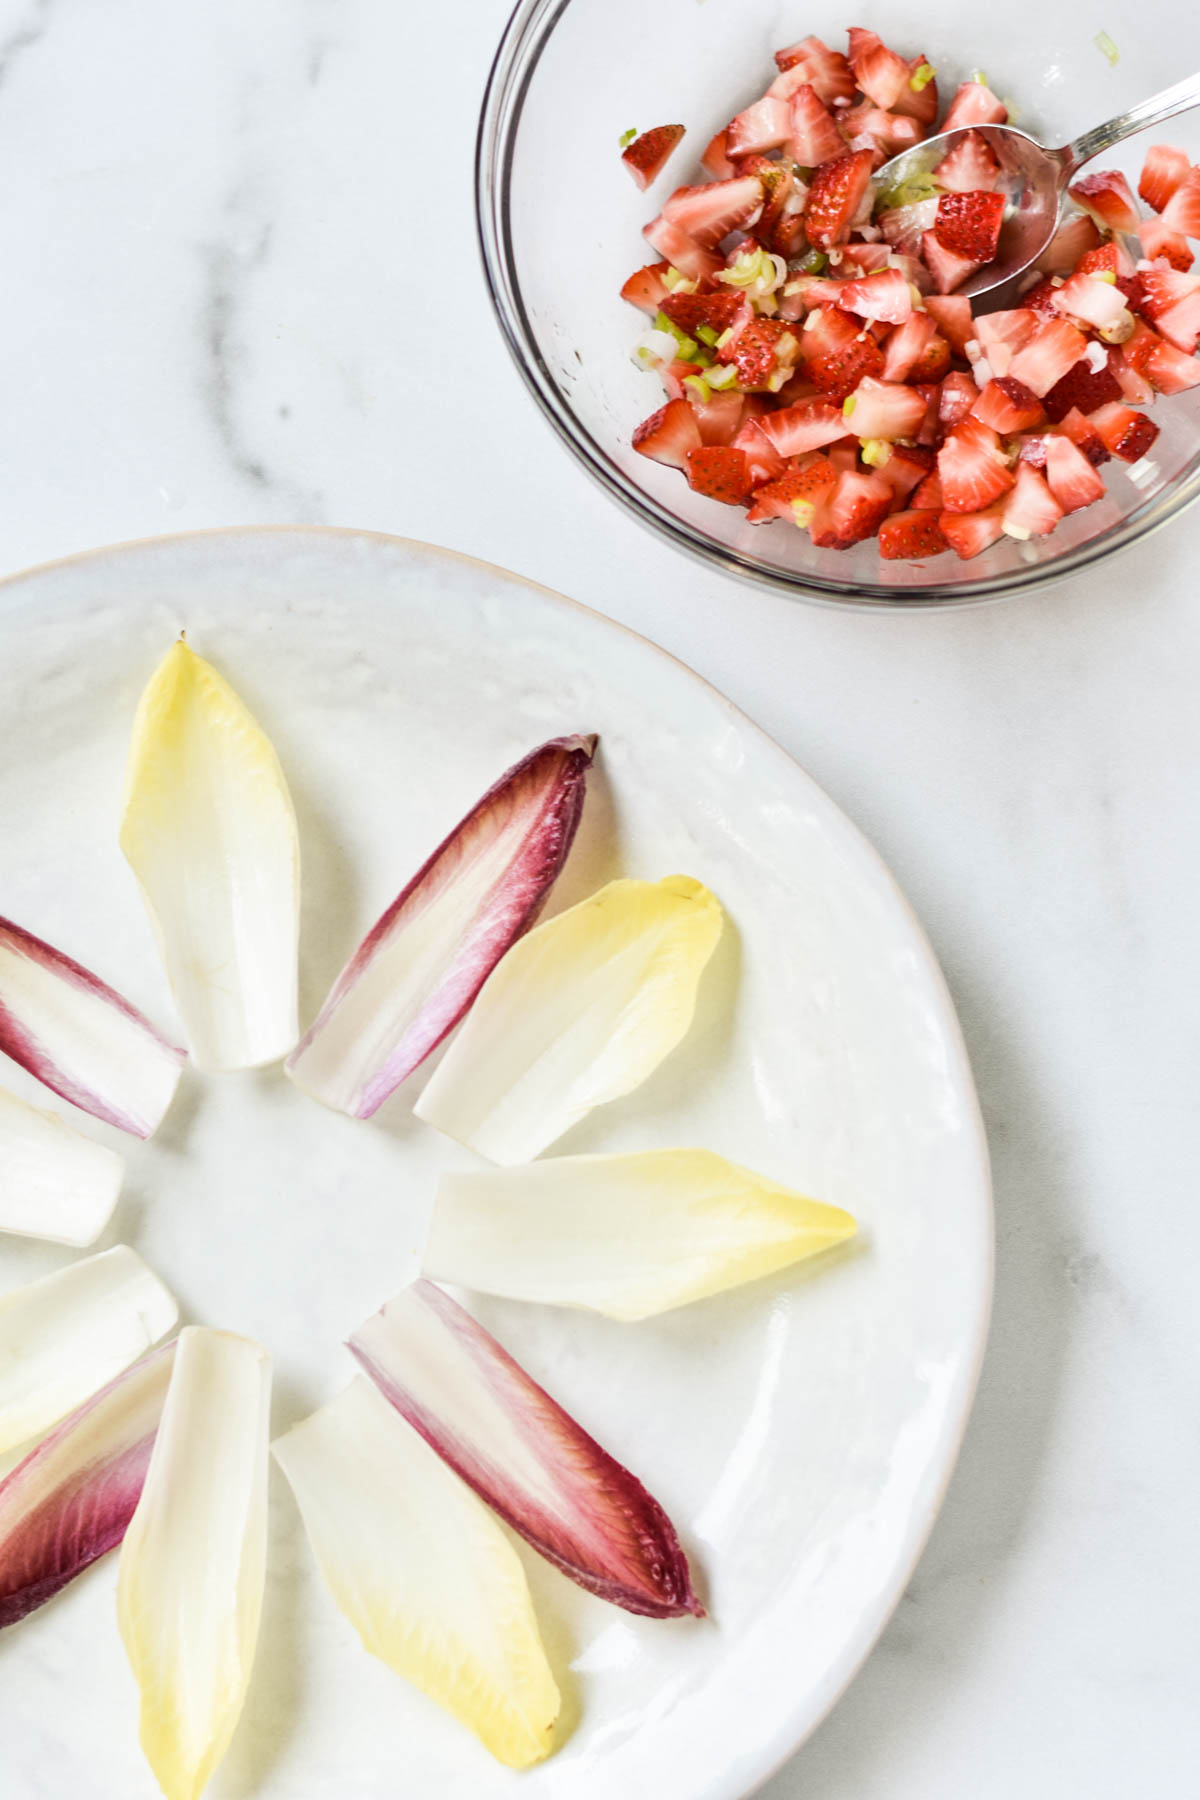 Endive boats and strawberry relish on a table.